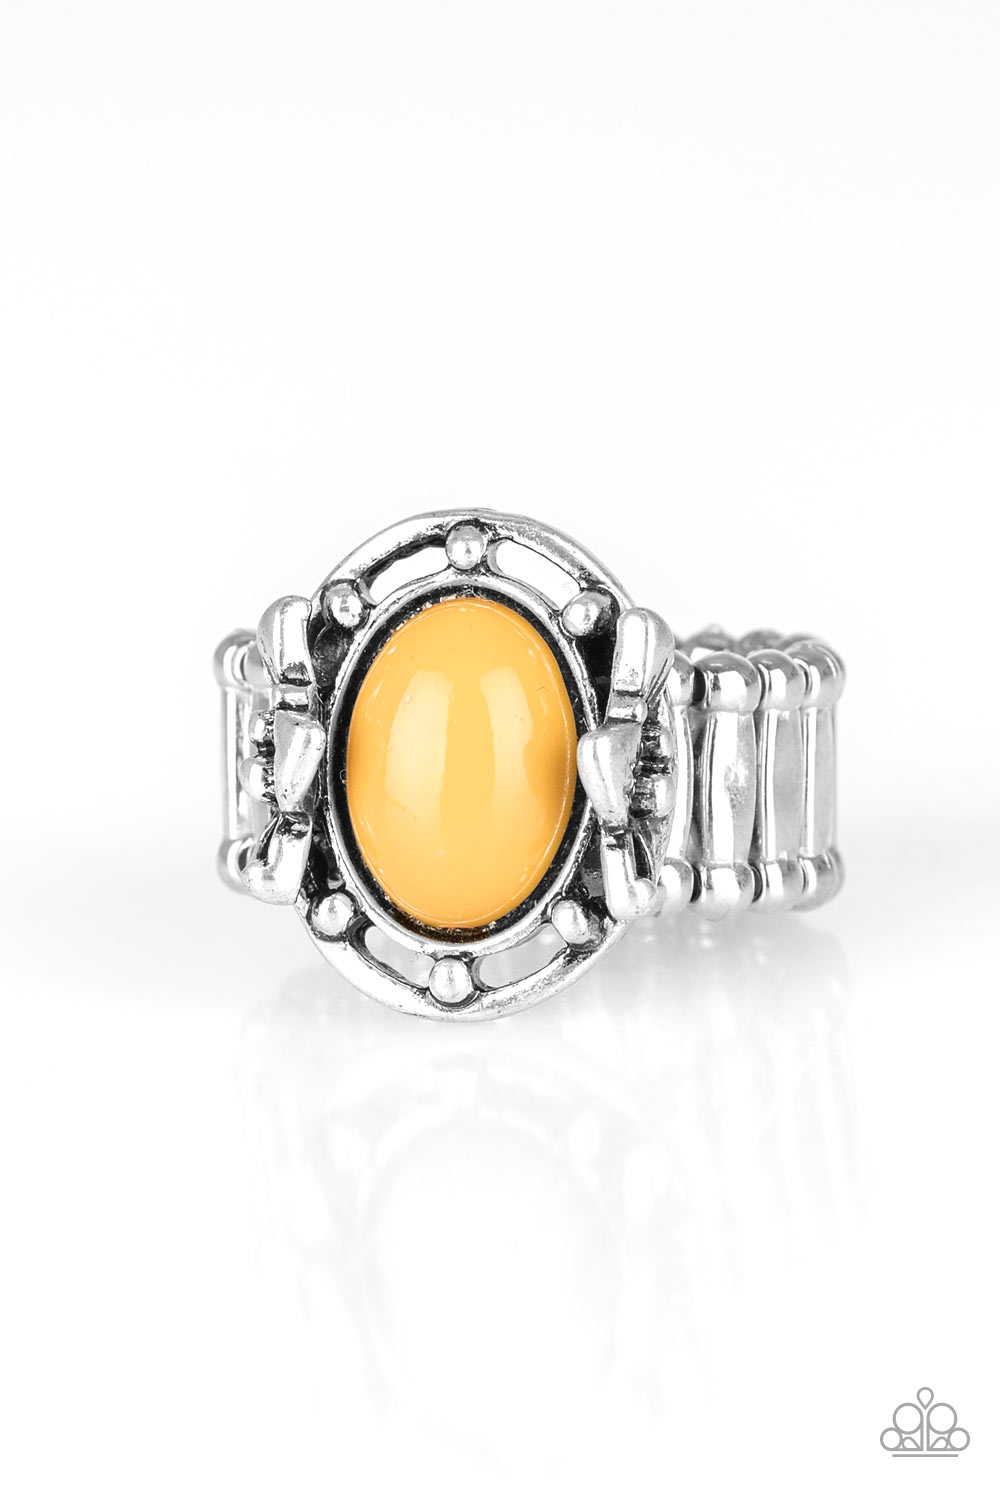 Paparazzi Accessories - Color Me Confident - Yellow Ring - Alies Bling Bar